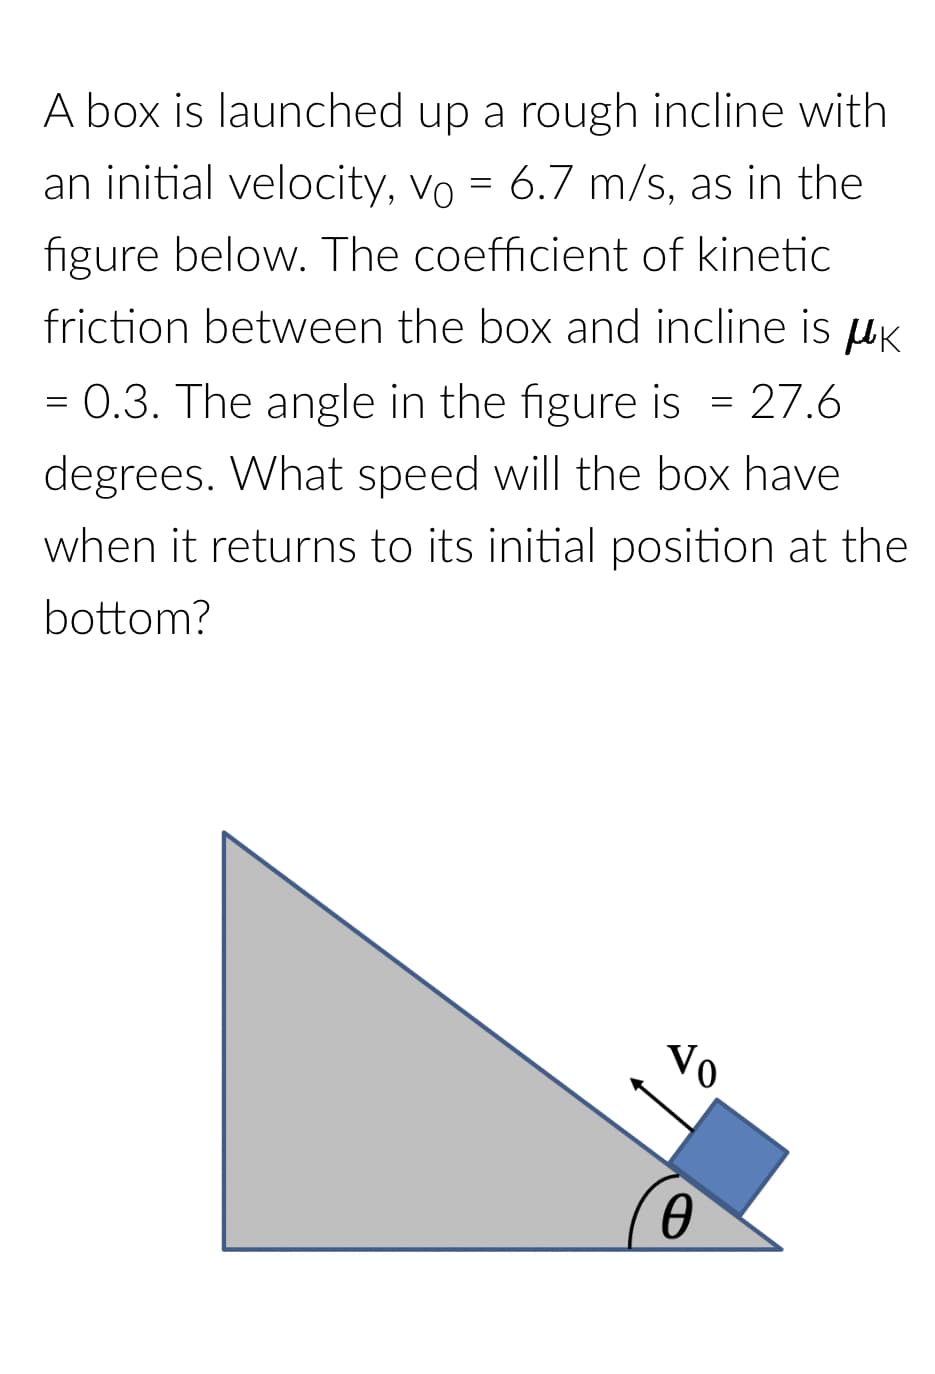 A box is launched up a rough incline with
an initial velocity, vô = 6.7 m/s, as in the
figure below. The coefficient of kinetic
friction between the box and incline is uk
= 0.3. The angle in the figure is = 27.6
degrees. What speed will the box have
when it returns to its initial position at the
bottom?
Ө